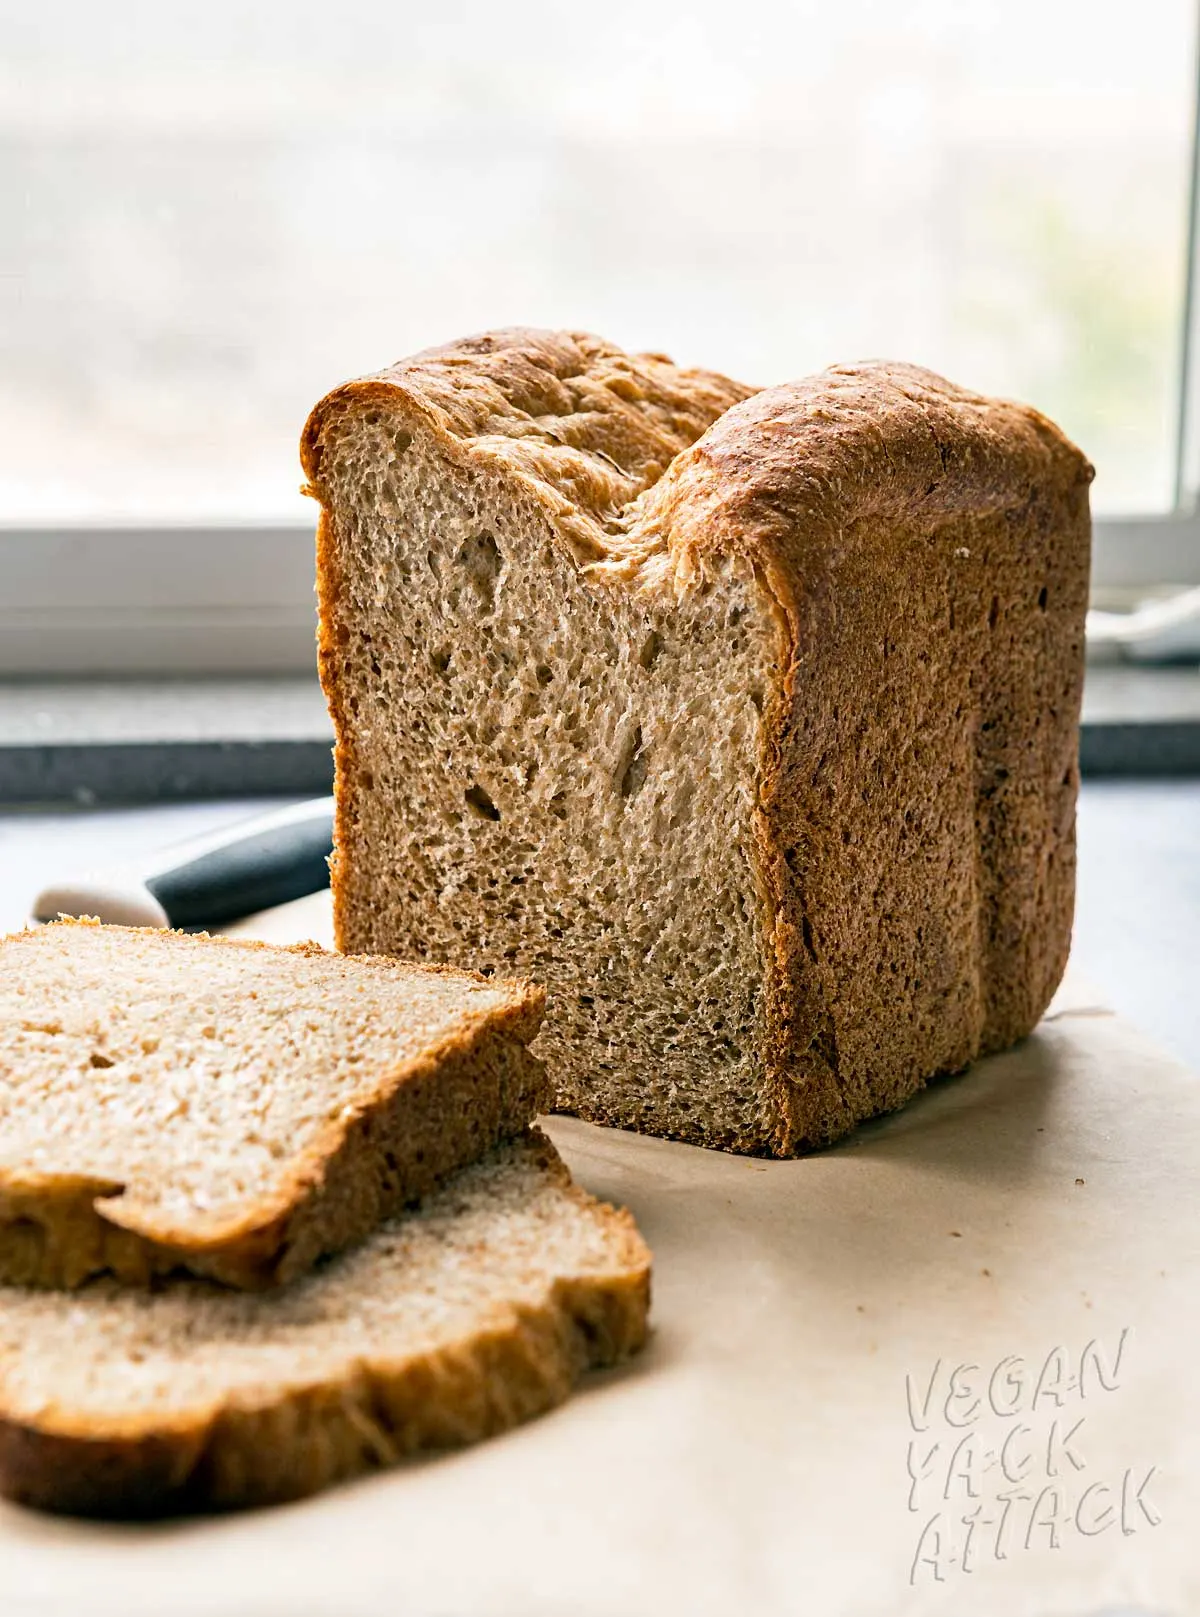 two slices of wheat bread next to the loaf and bread knife